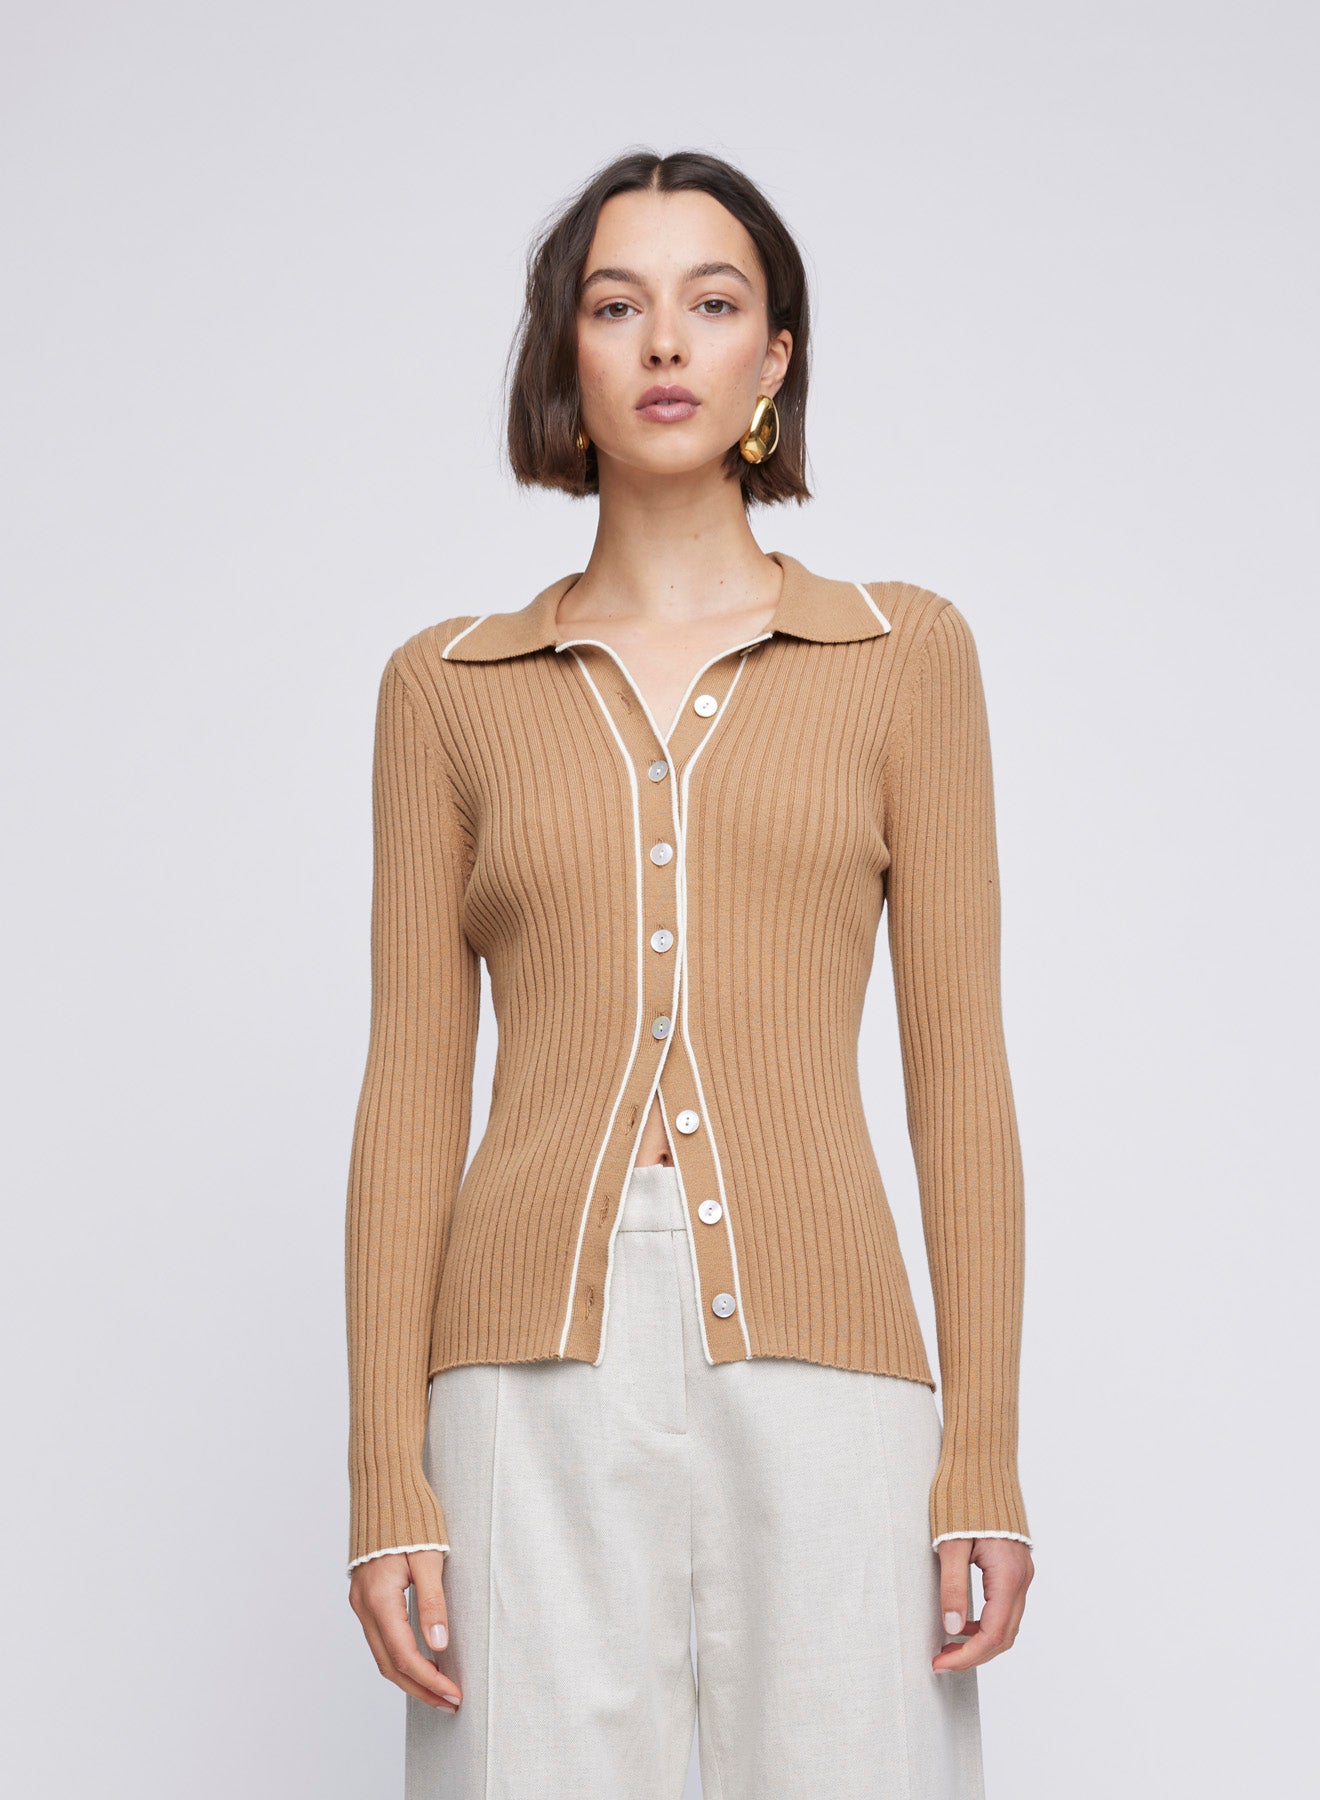 ANNA QUAN's signature style shines in our Cotton Rib Long Sleeve Polo Knit Top. With contrast trims and a button-up design, this versatile piece seamlessly blends comfort and sophistication for a refined everyday look.